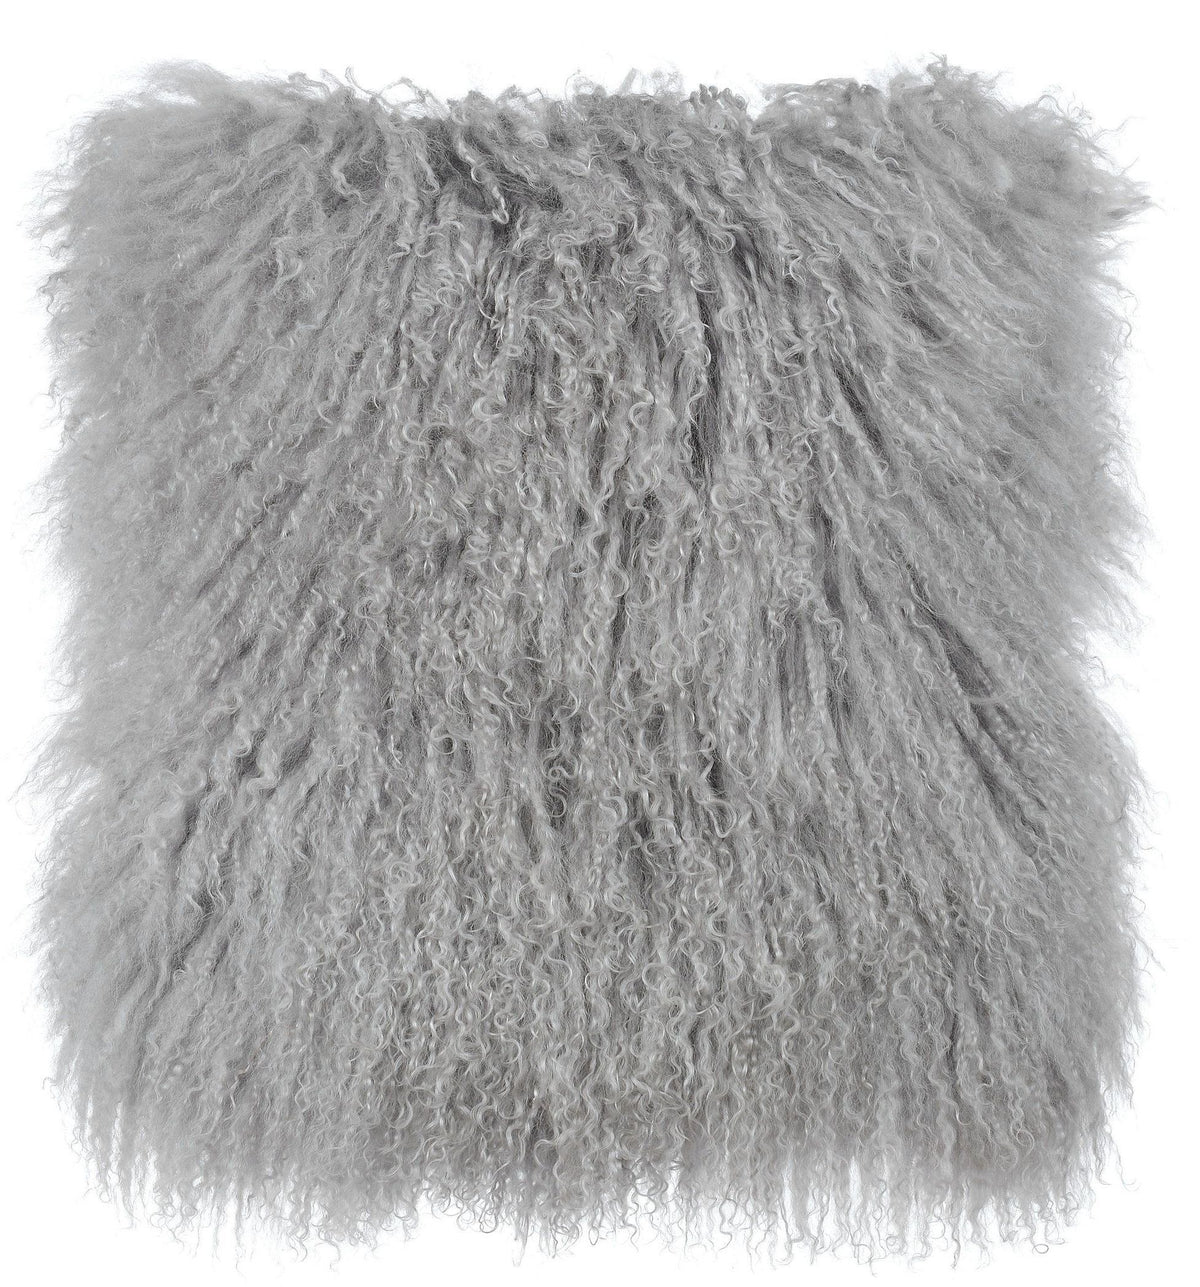 January Grey Sheep Fur Pillow - Luxury Living Collection